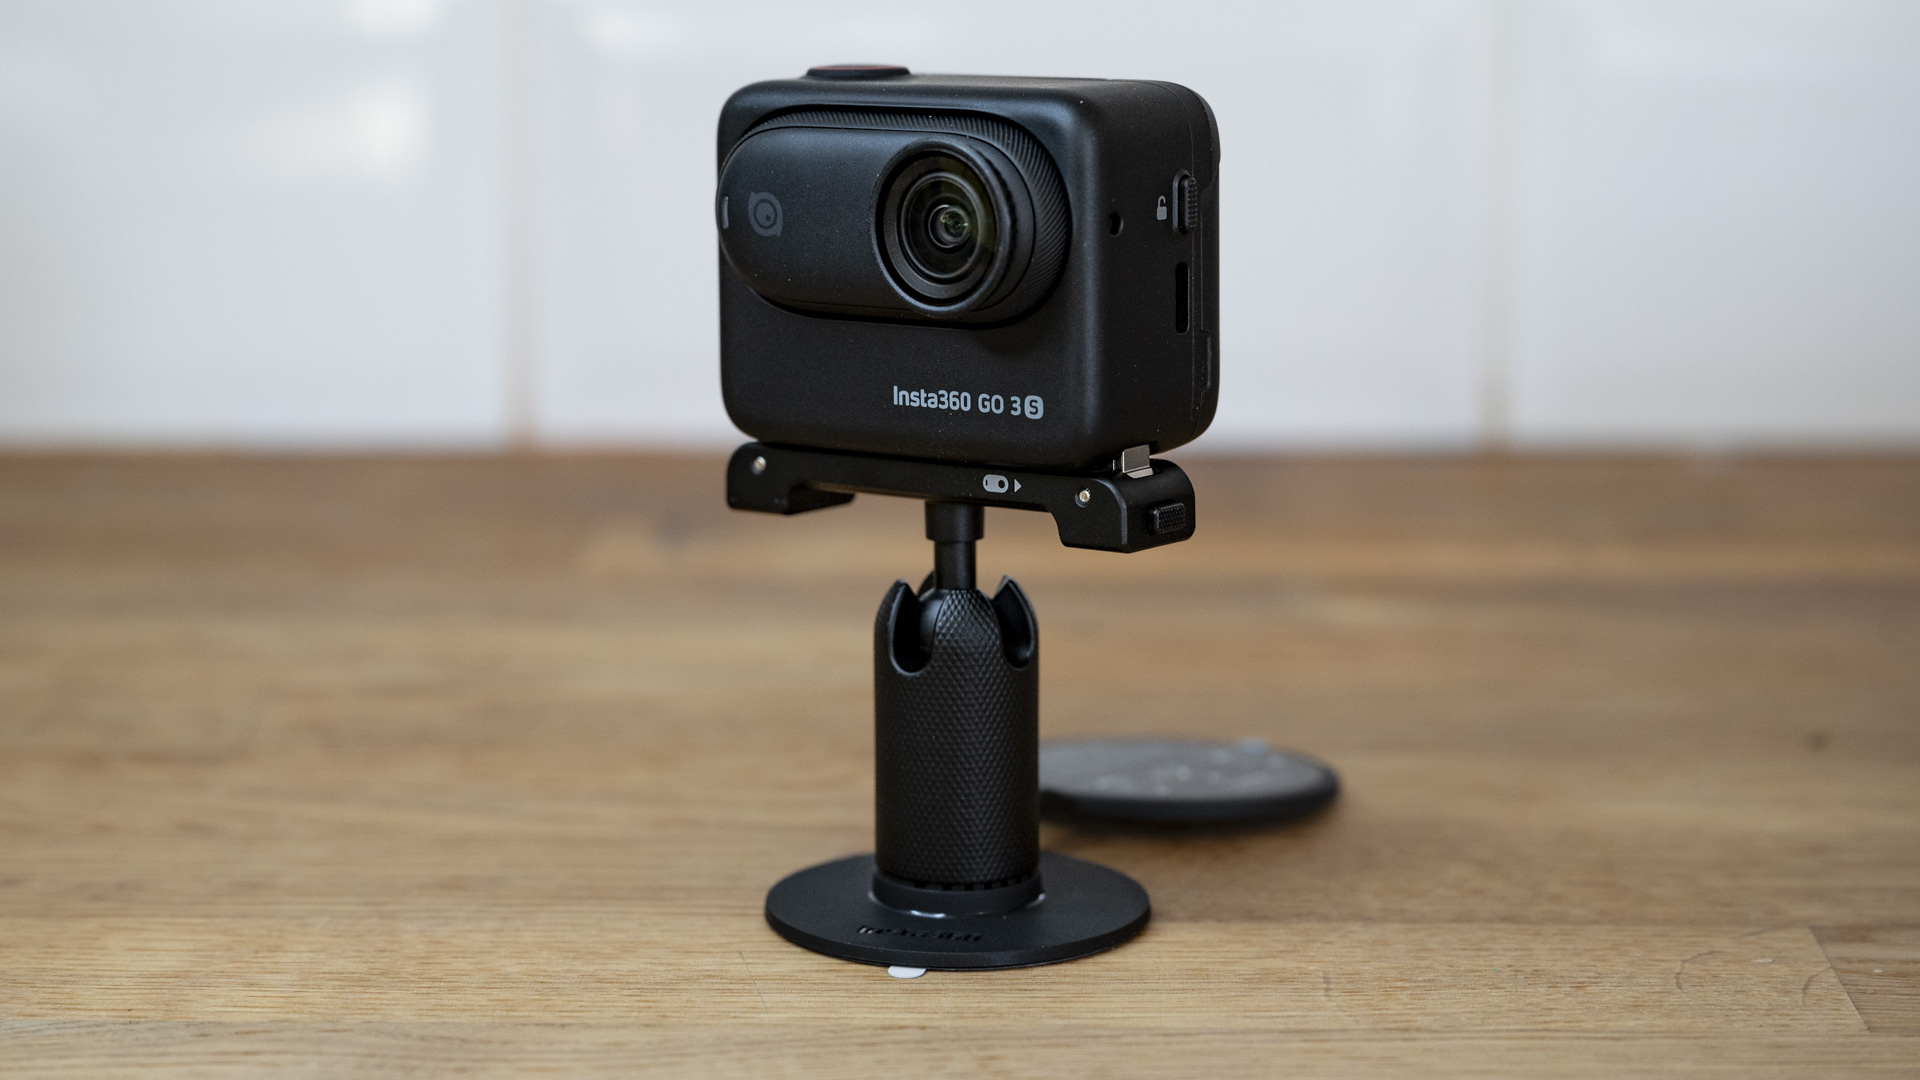 Insta360 Go 3S camera in its housing and attached to an accessory on a wooden surface